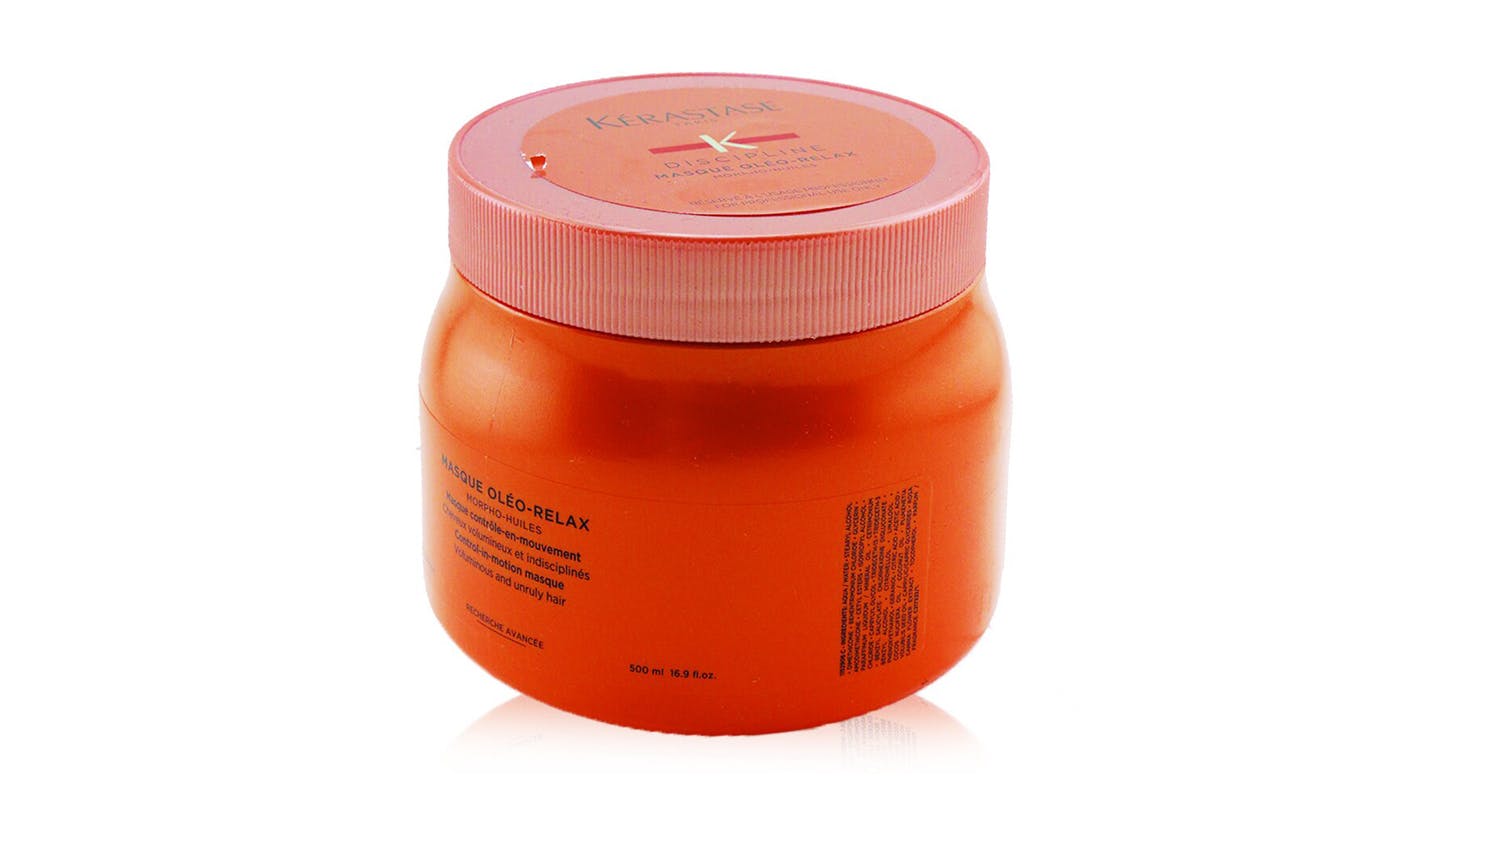 Discipline Masque Oleo-Relax Control-in-Motion Masque (Voluminous and Unruly Hair) - 500ml/16.9oz